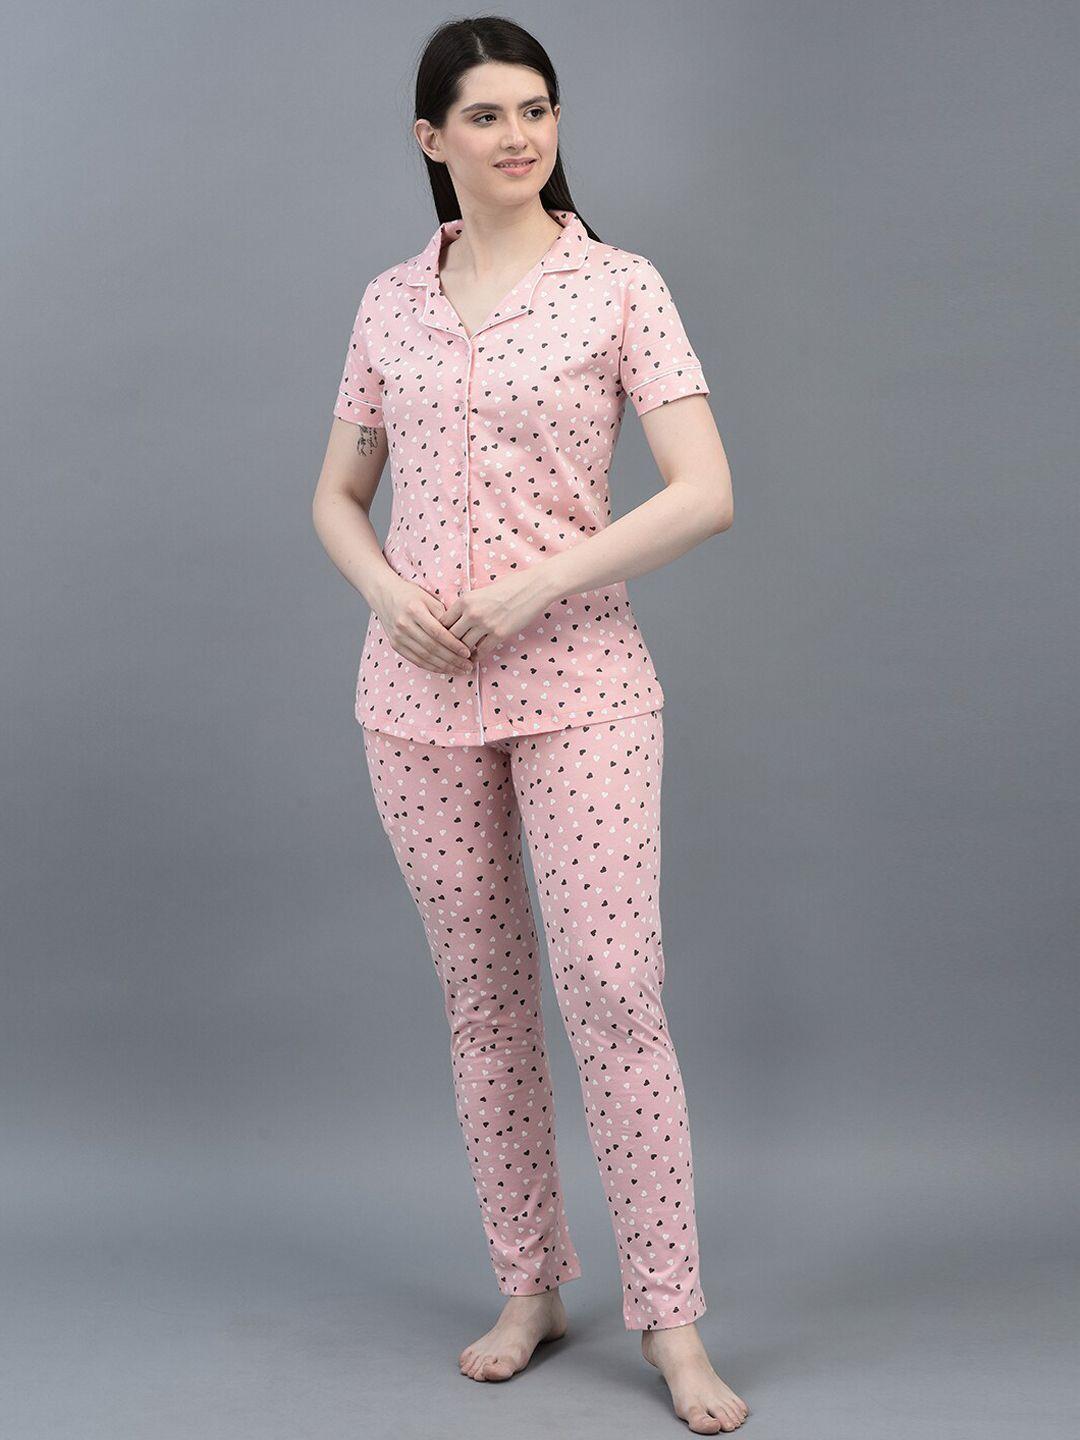 dollar-missy-conversational-printed-pure-cotton-night-suit